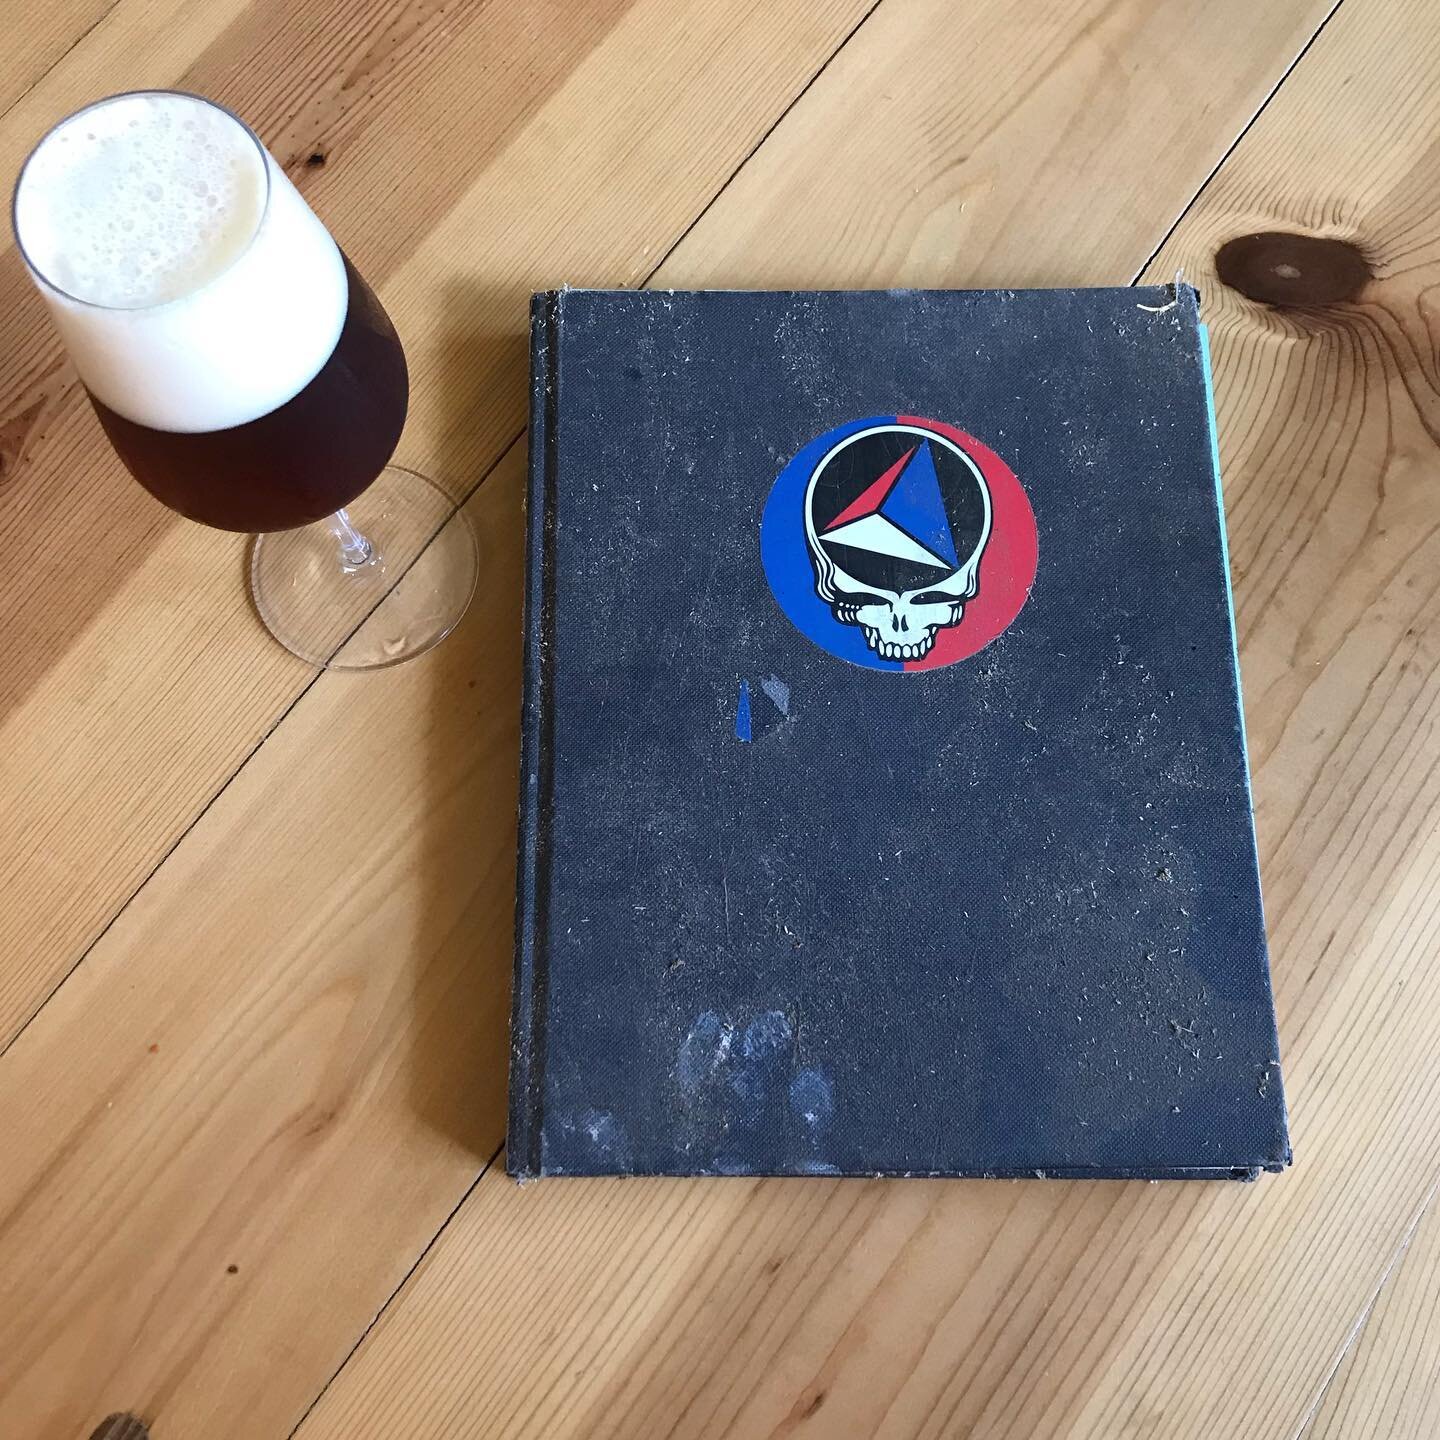 Revisiting a test beer from a long while back and going through a dusty old book of brewing notes. Hoping to get this one in tank soon as an appendage to the kinder weather this fall.